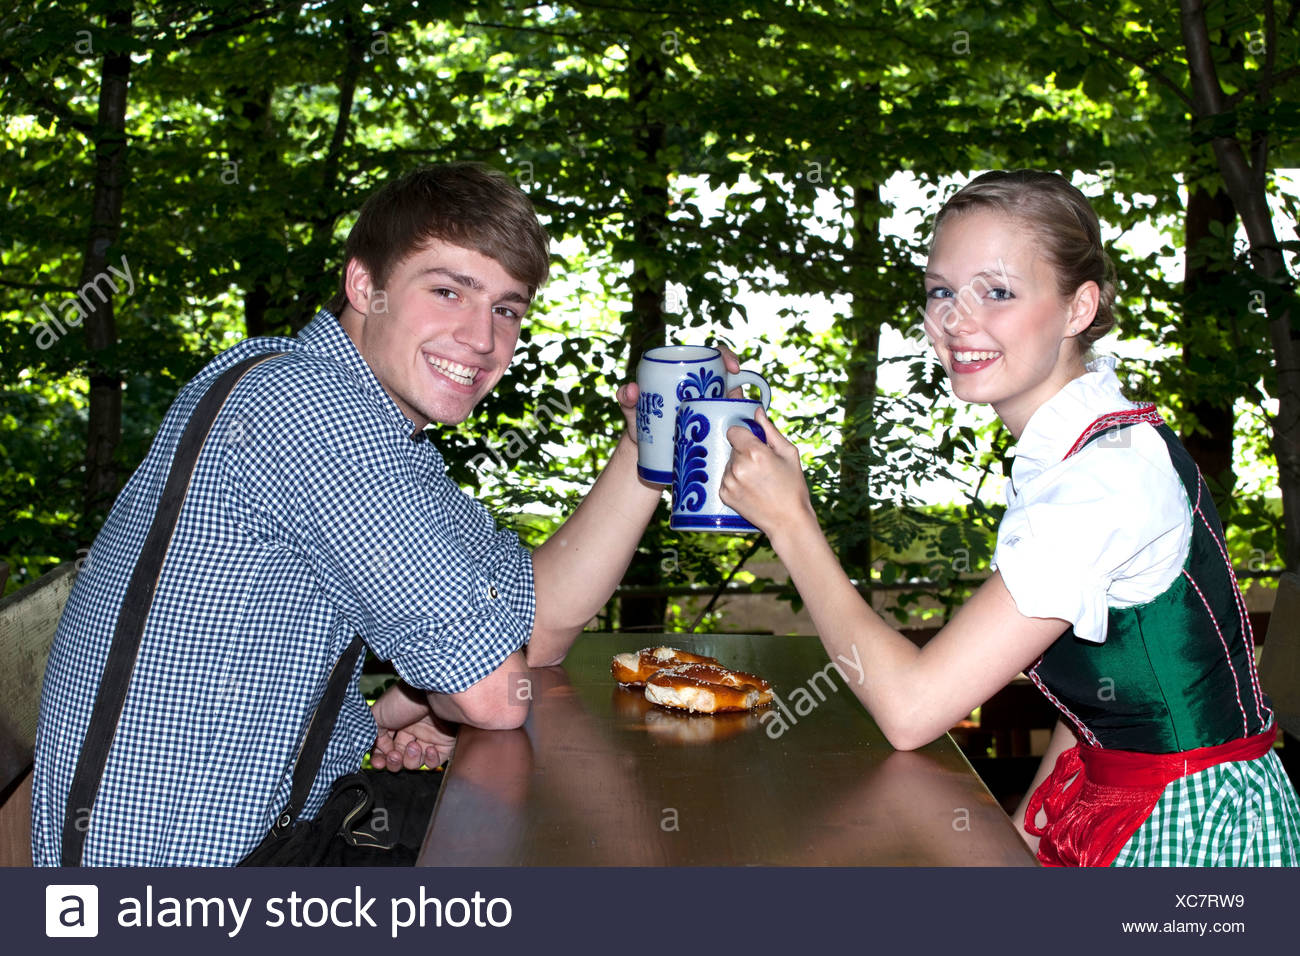 Young Couple In Dirndl And Lederhosen Clinking Their Beer Steins